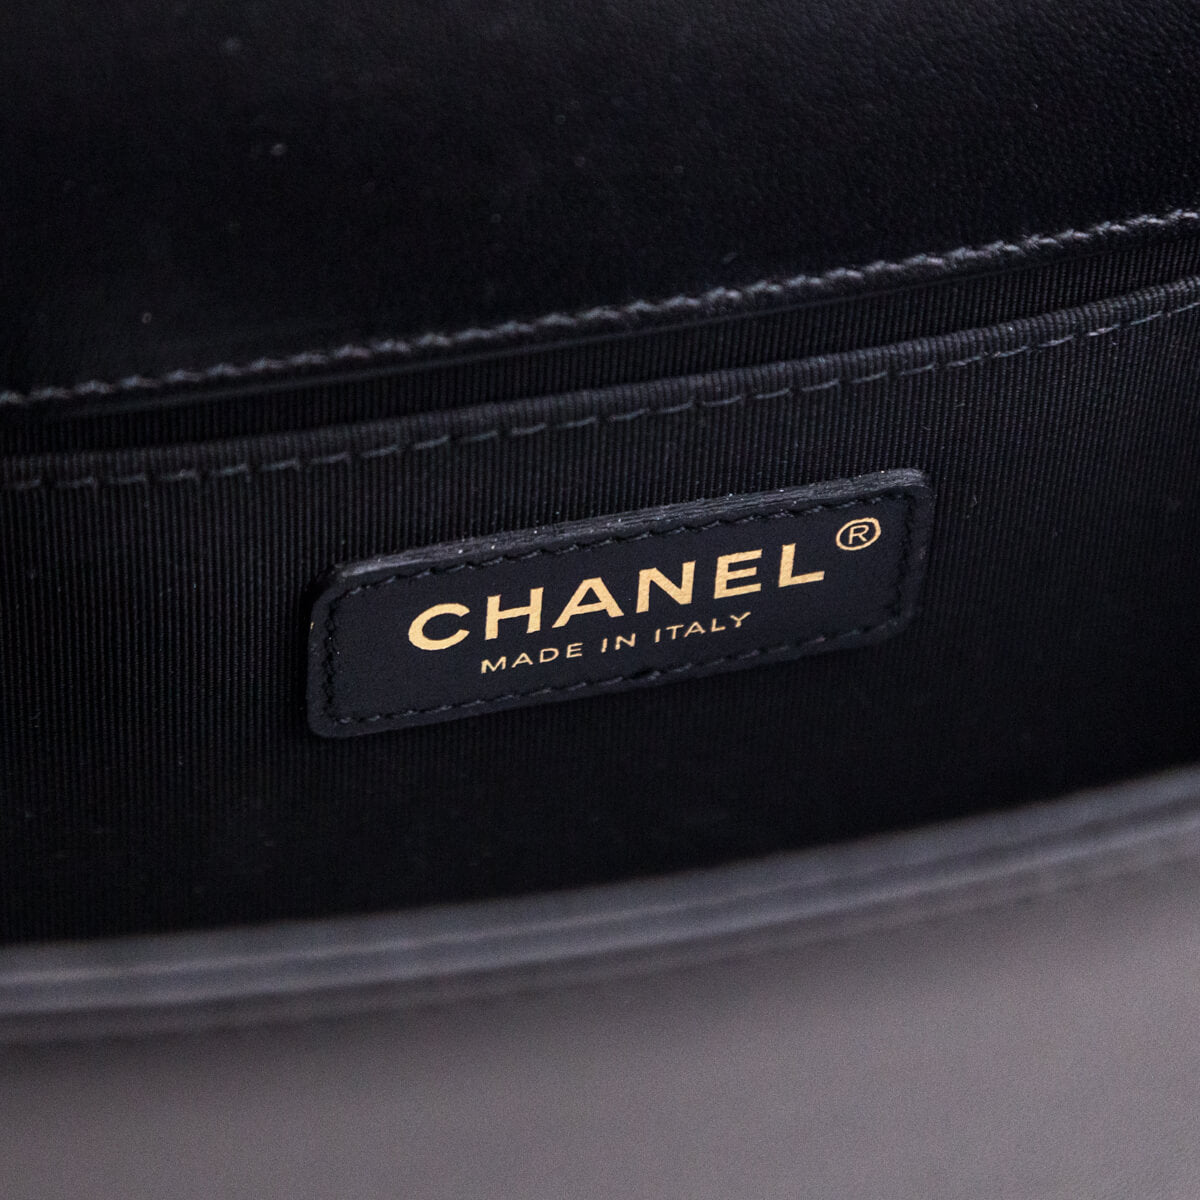 authentic chanel made in italy label